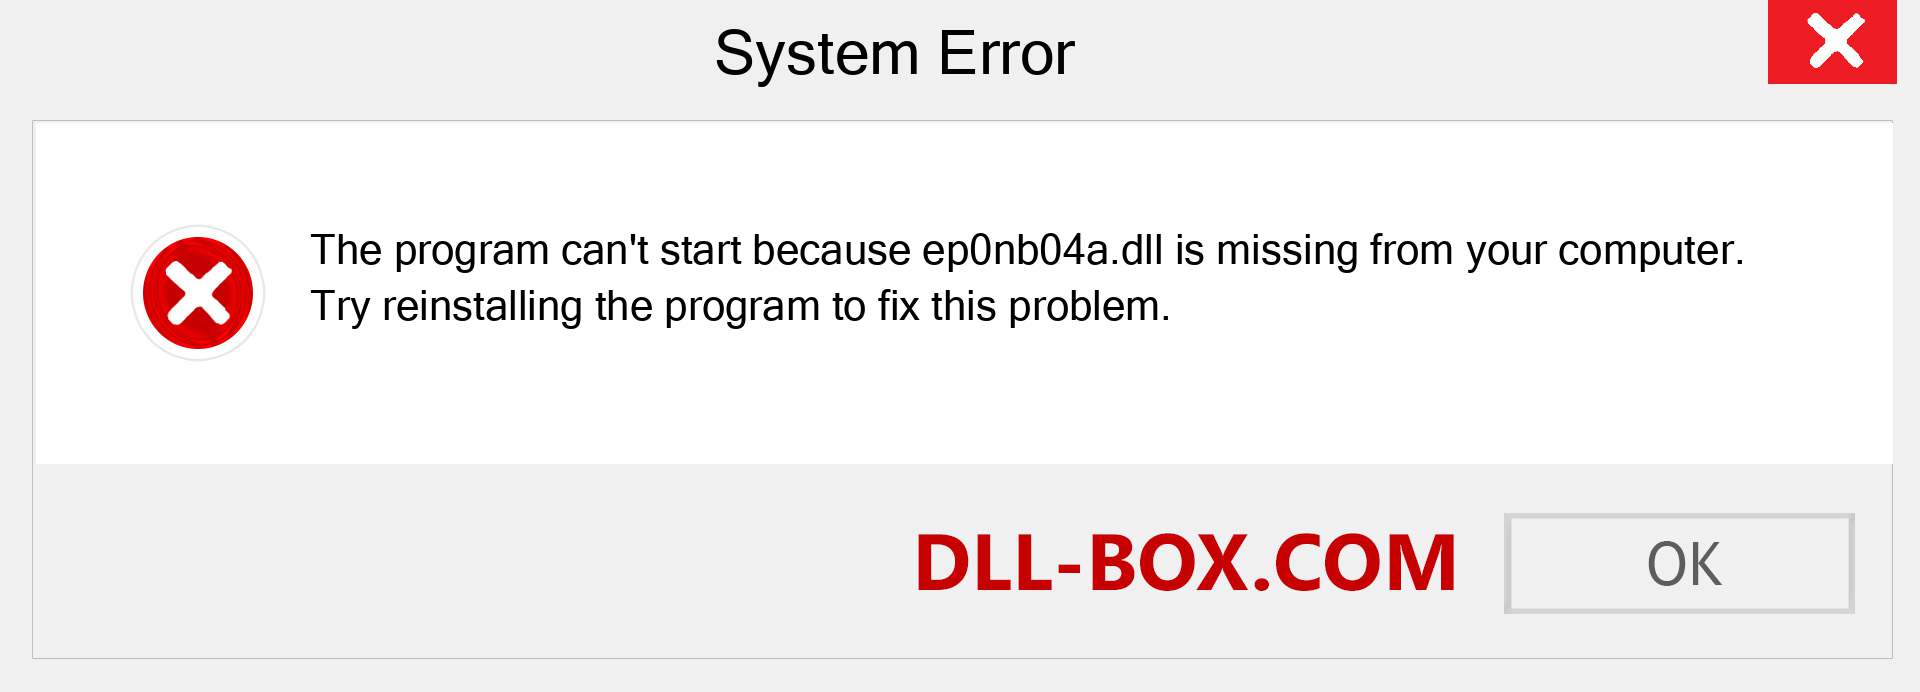  ep0nb04a.dll file is missing?. Download for Windows 7, 8, 10 - Fix  ep0nb04a dll Missing Error on Windows, photos, images